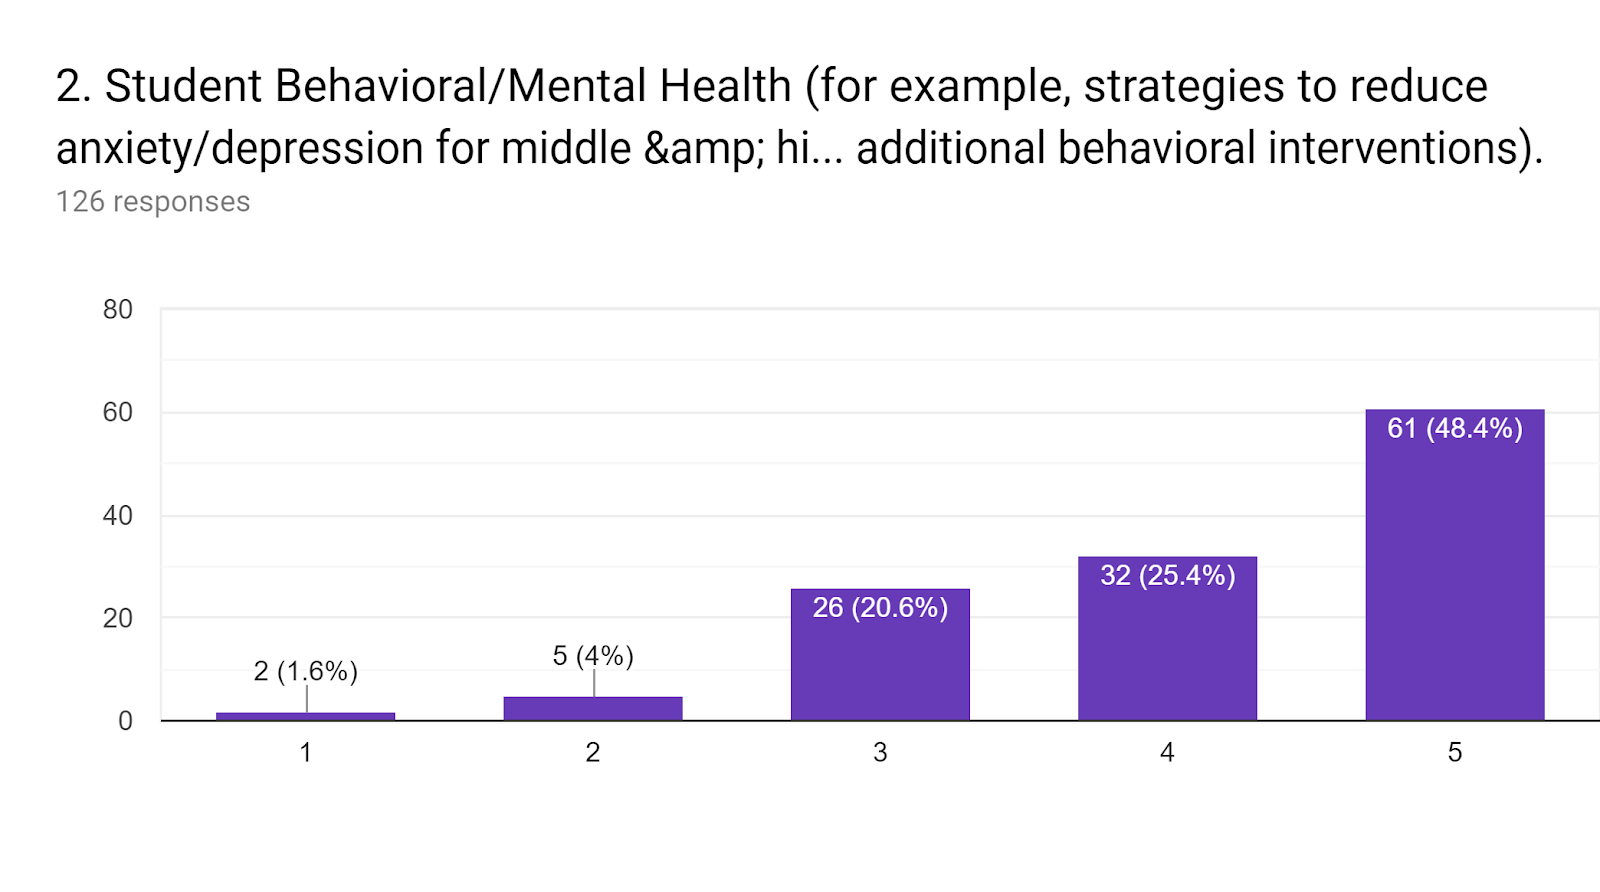 Forms response chart. Question title: 2.	Student Behavioral/Mental Health (for example, strategies to reduce anxiety/depression for middle &amp; high school students develop multi-tiered systems of support, additional behavioral interventions).. Number of responses: 126 responses.